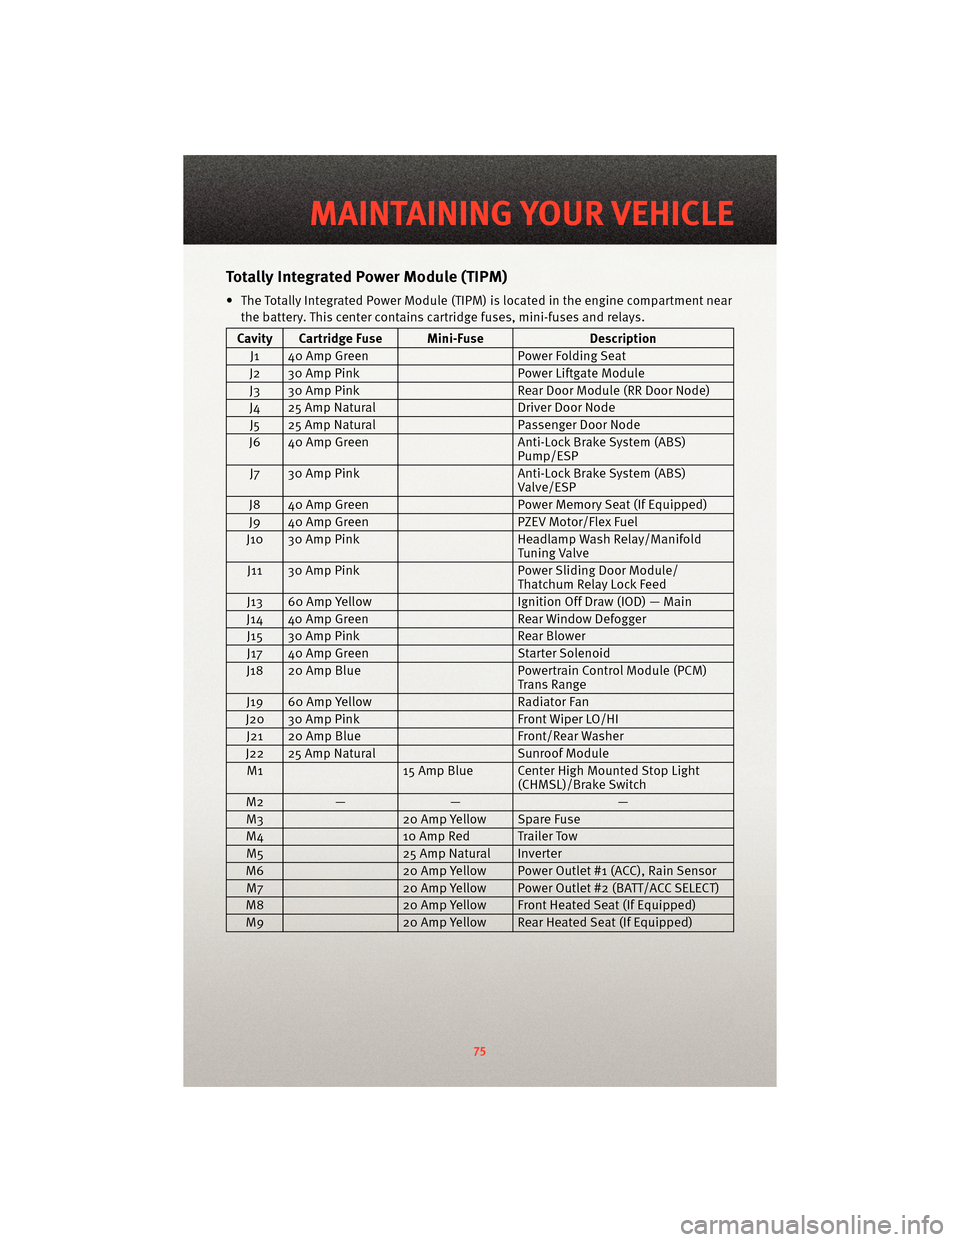 DODGE GRAND CARAVAN 2010 5.G User Guide TotallyIntegrated Power Module (TIPM)
• The Totally Integrated Power Module (TIPM) is located in the engine compartment near
the battery. This center contains cartridge fuses, mini-fuses and relays.